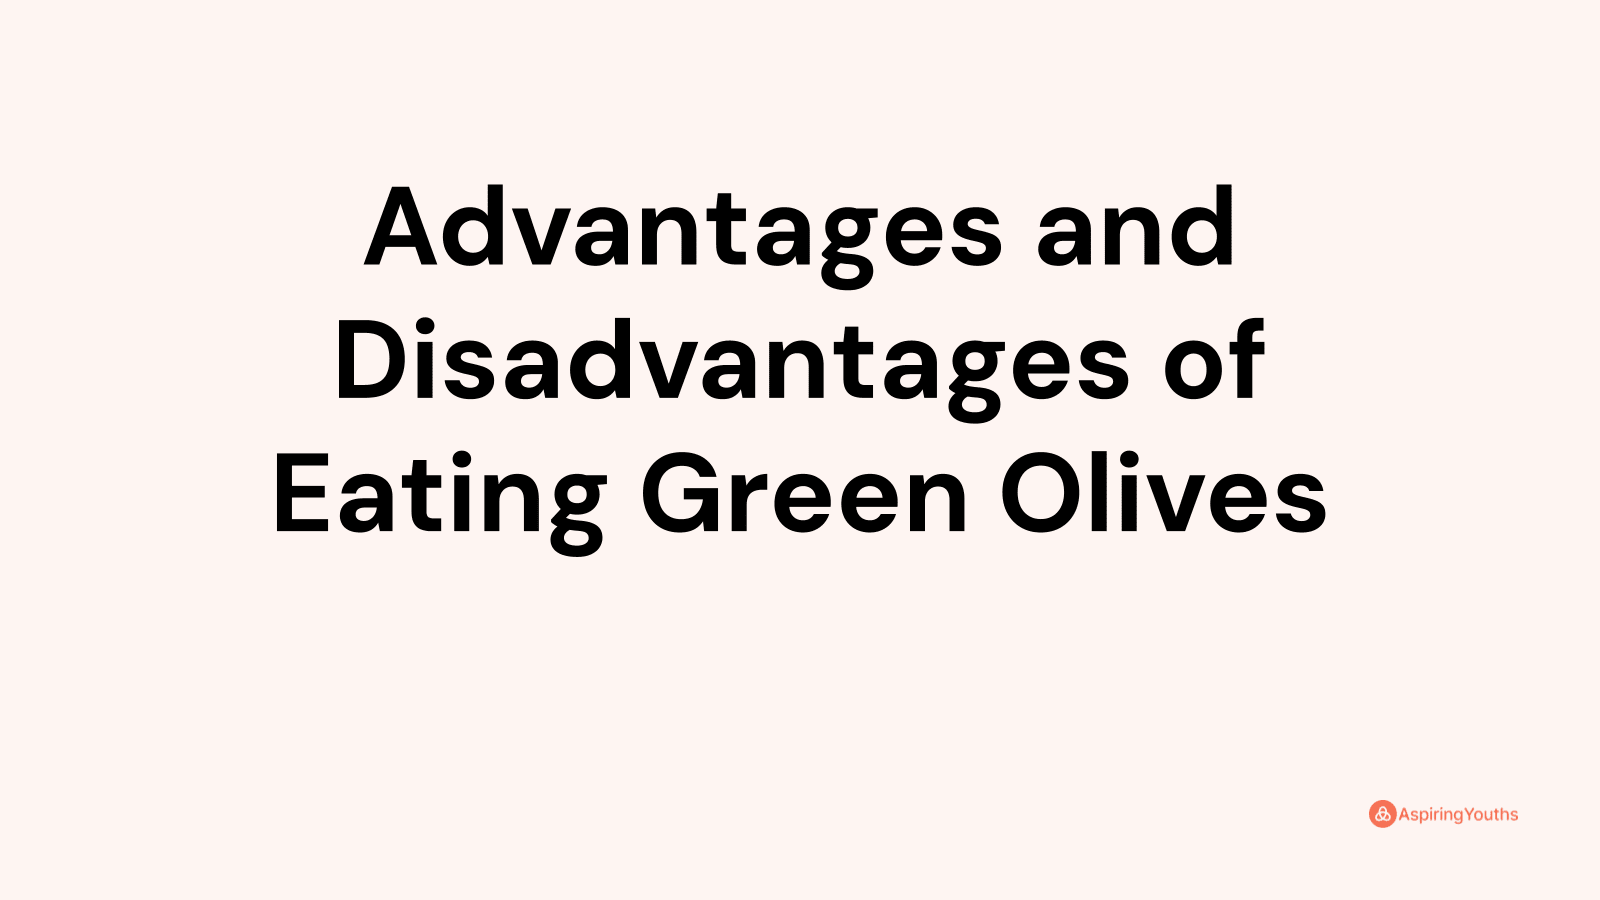 Advantages and disadvantages of Eating Green Olives